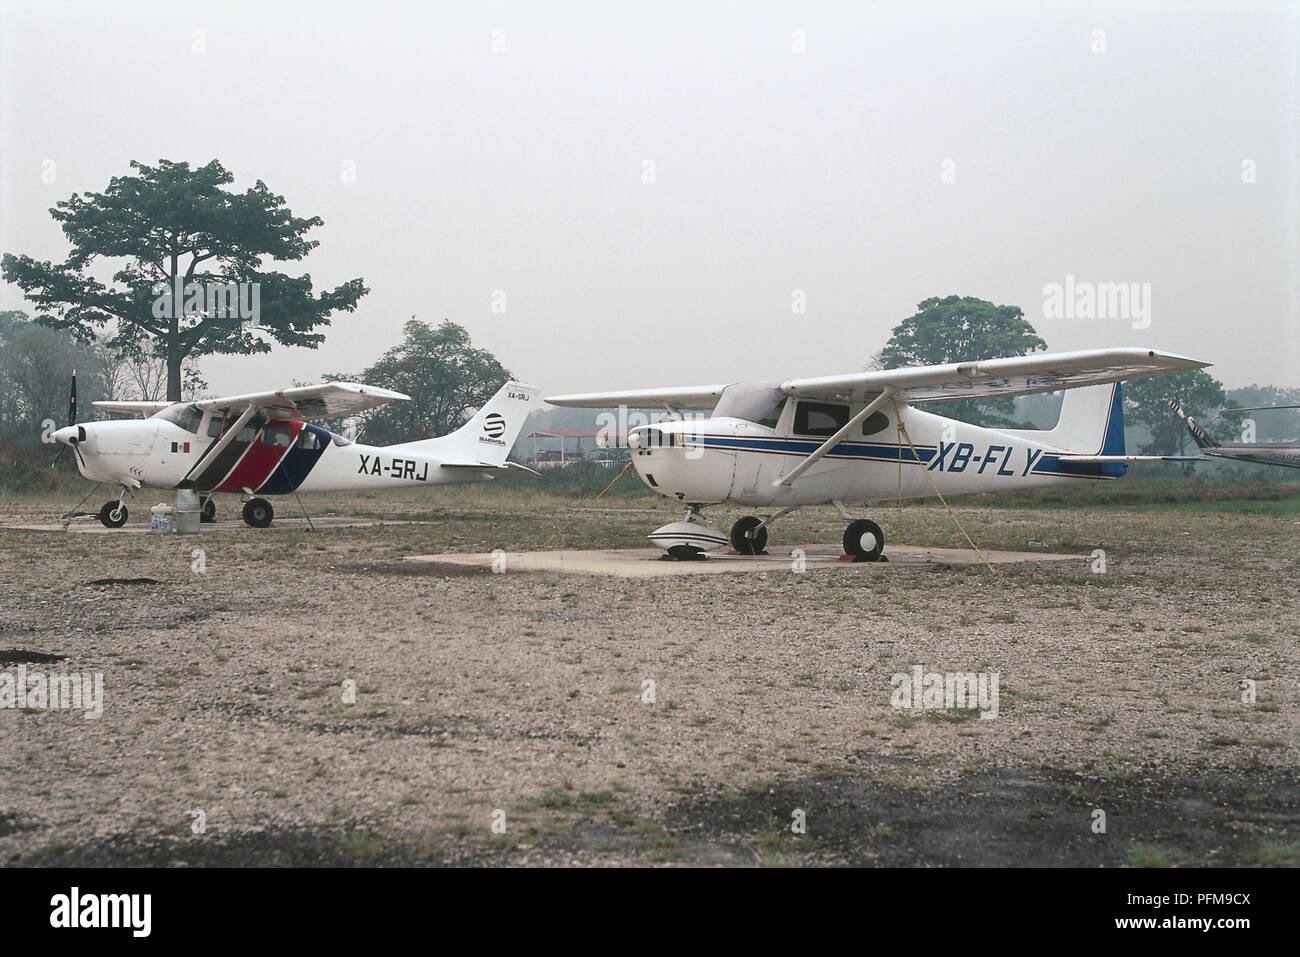 Mexico, Palenque Airport, two small, domestic propeller planes standing in sand. Stock Photo